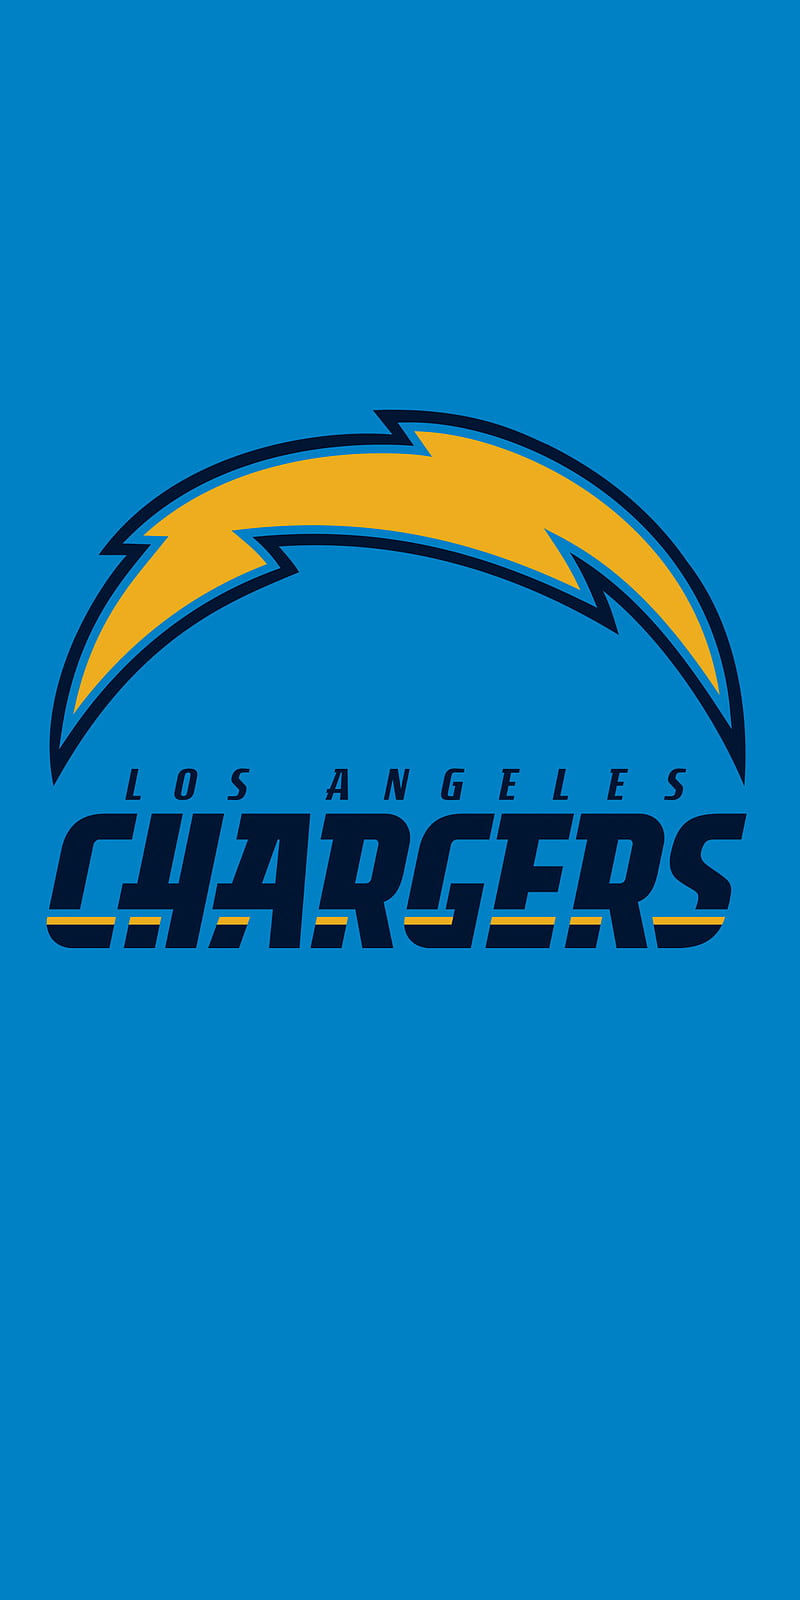 Share 67+ los angeles chargers wallpaper best - in.coedo.com.vn